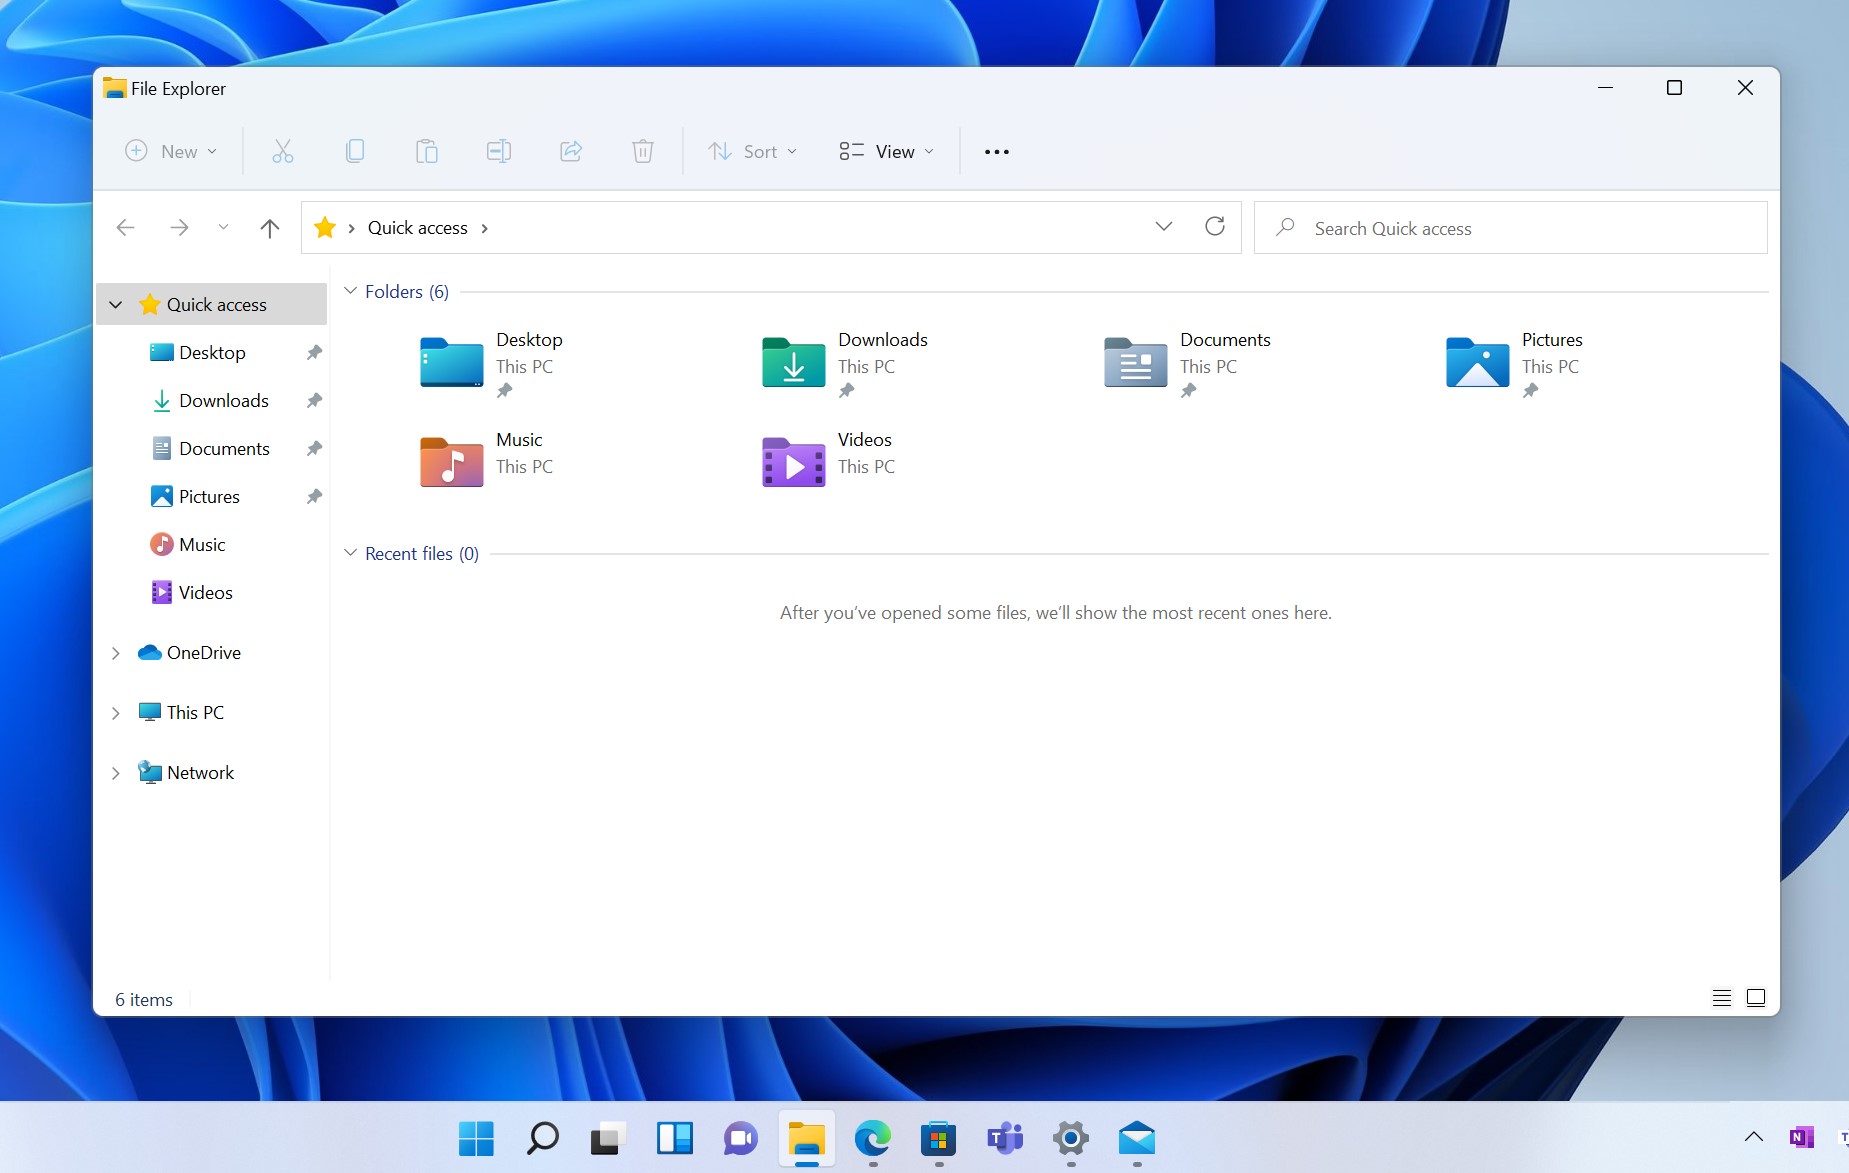 Windows 11: Biggest Changes and New Features